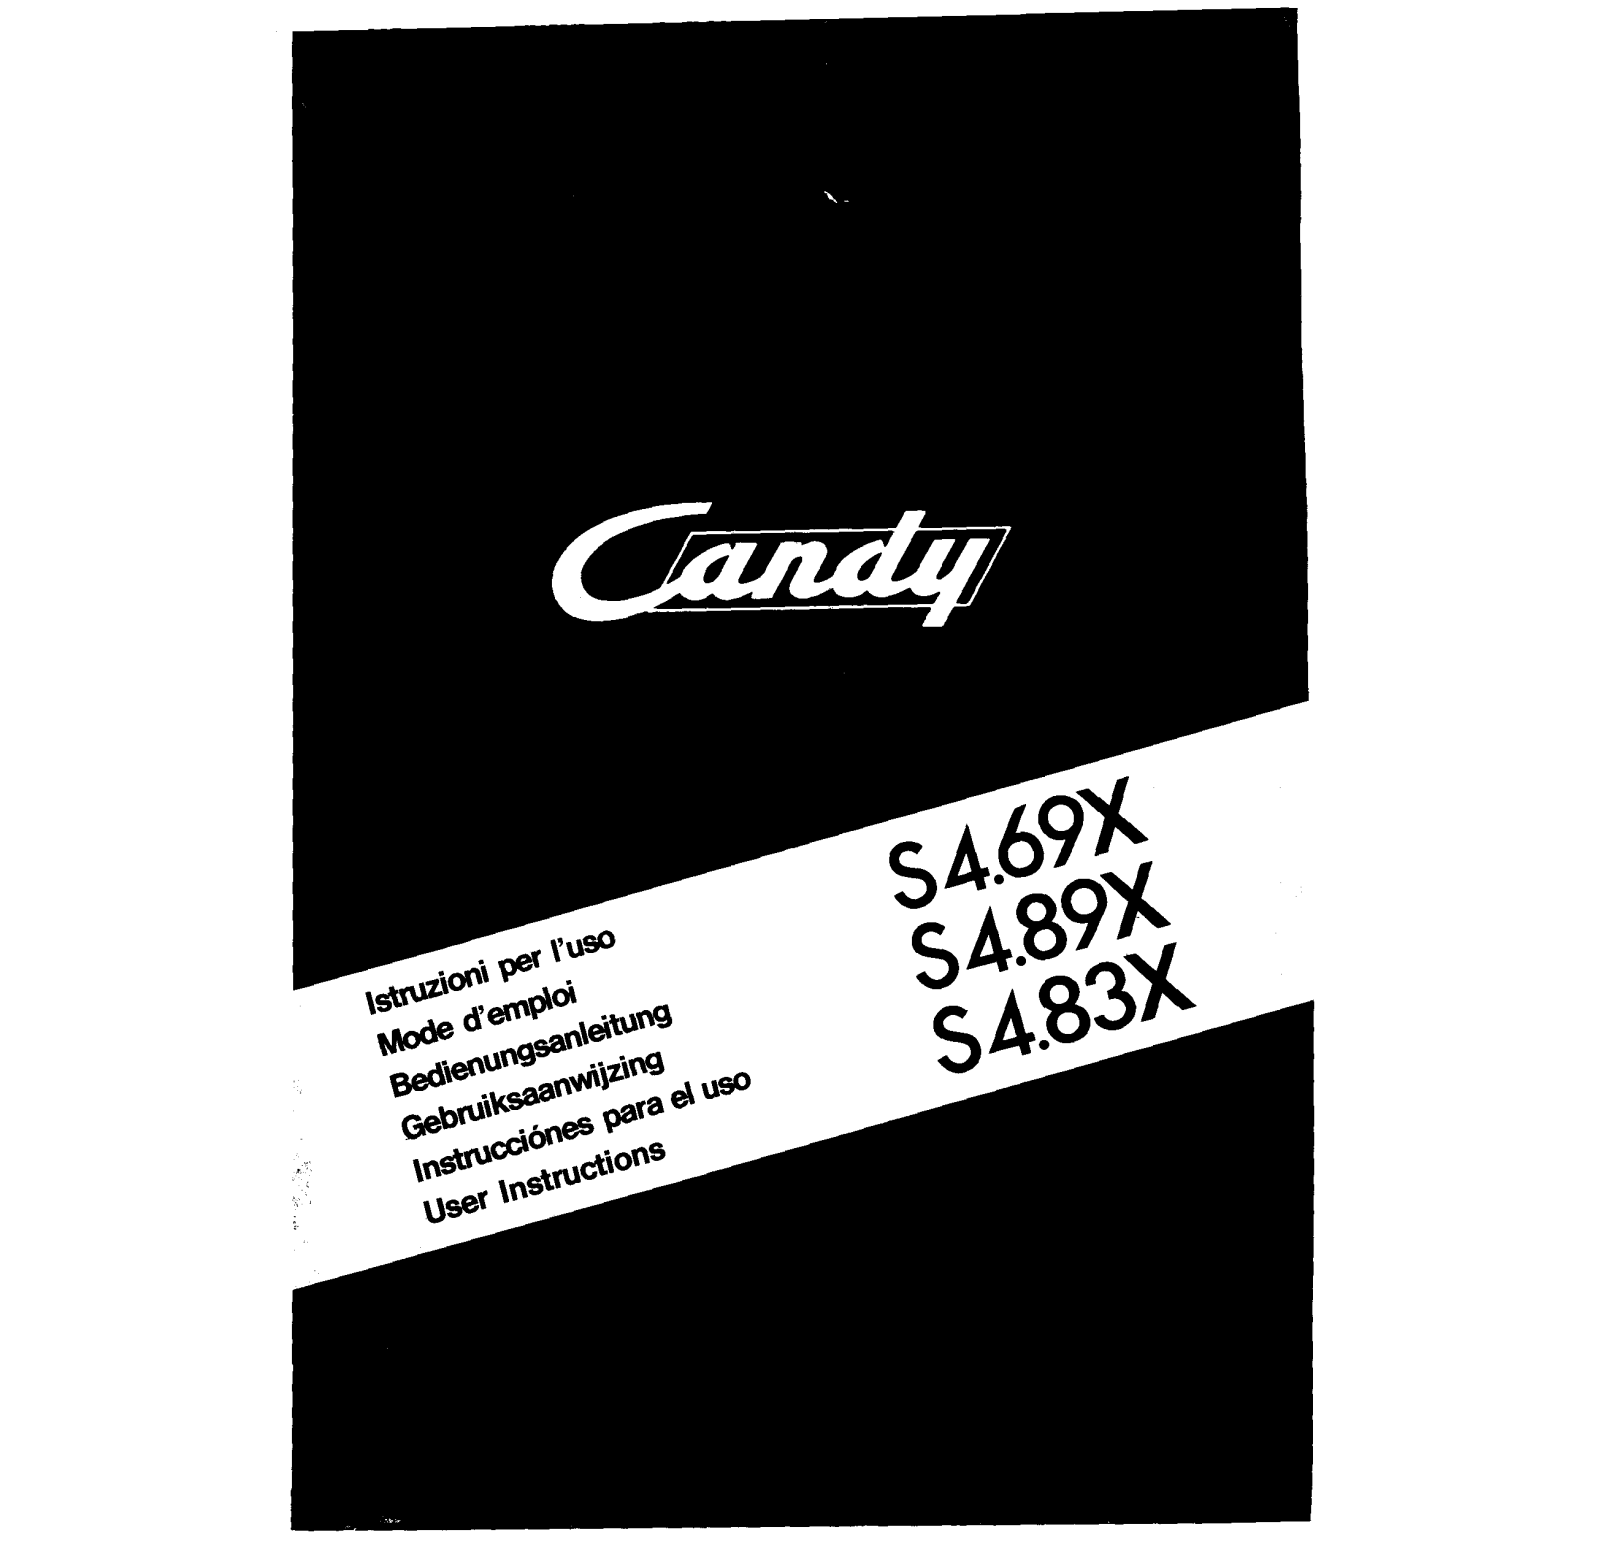 Candy S469X, S489X, S483X User Manual